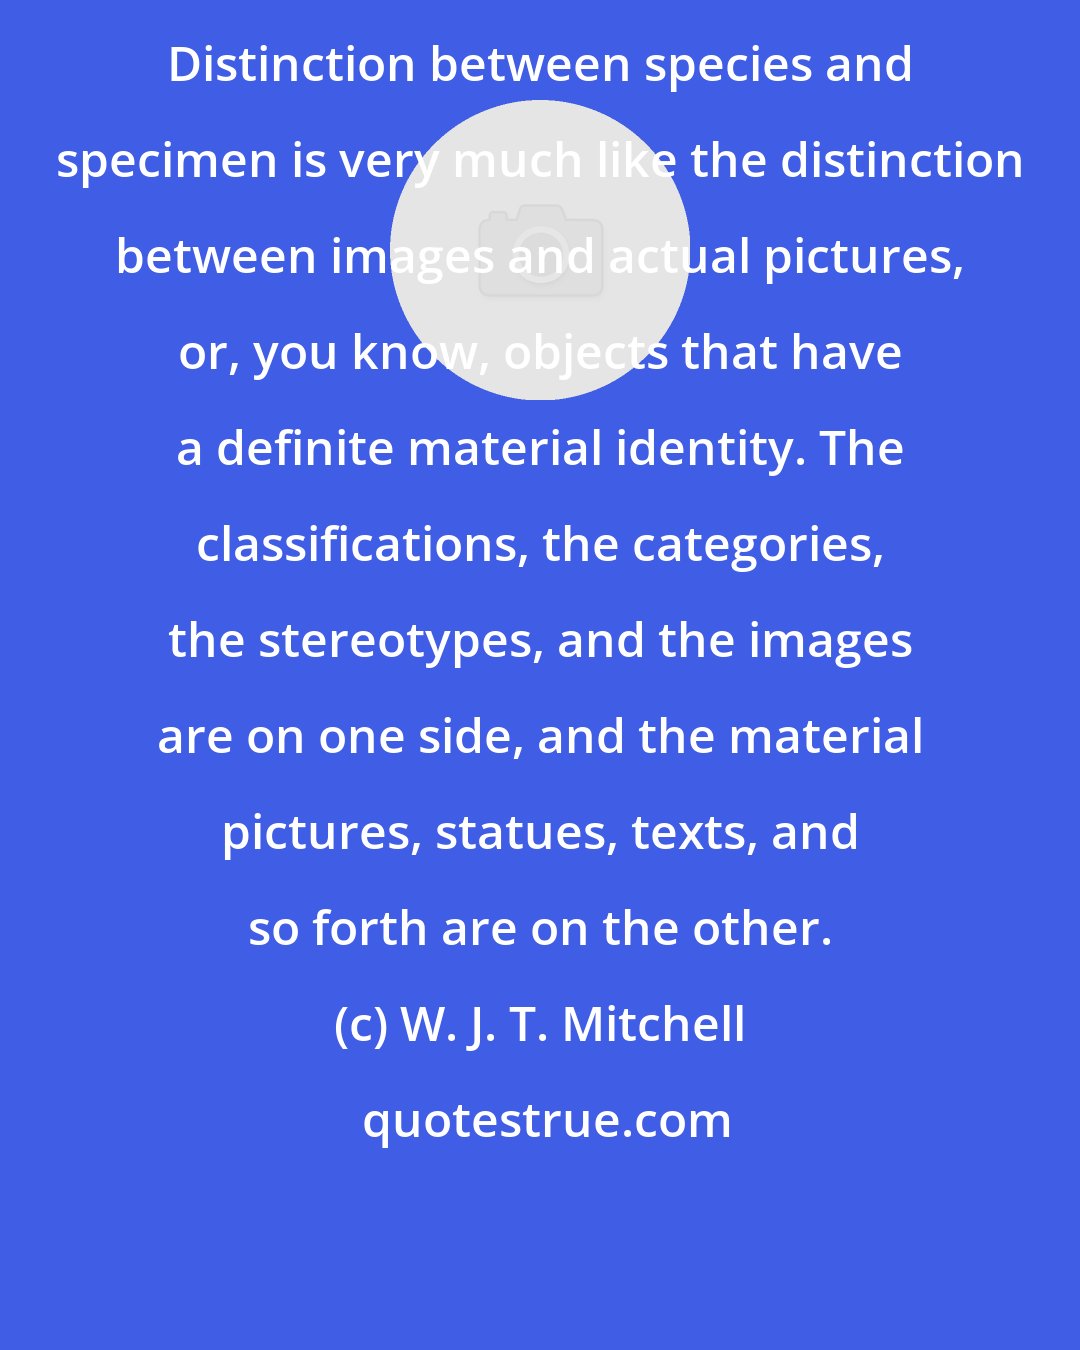 W. J. T. Mitchell: Distinction between species and specimen is very much like the distinction between images and actual pictures, or, you know, objects that have a definite material identity. The classifications, the categories, the stereotypes, and the images are on one side, and the material pictures, statues, texts, and so forth are on the other.